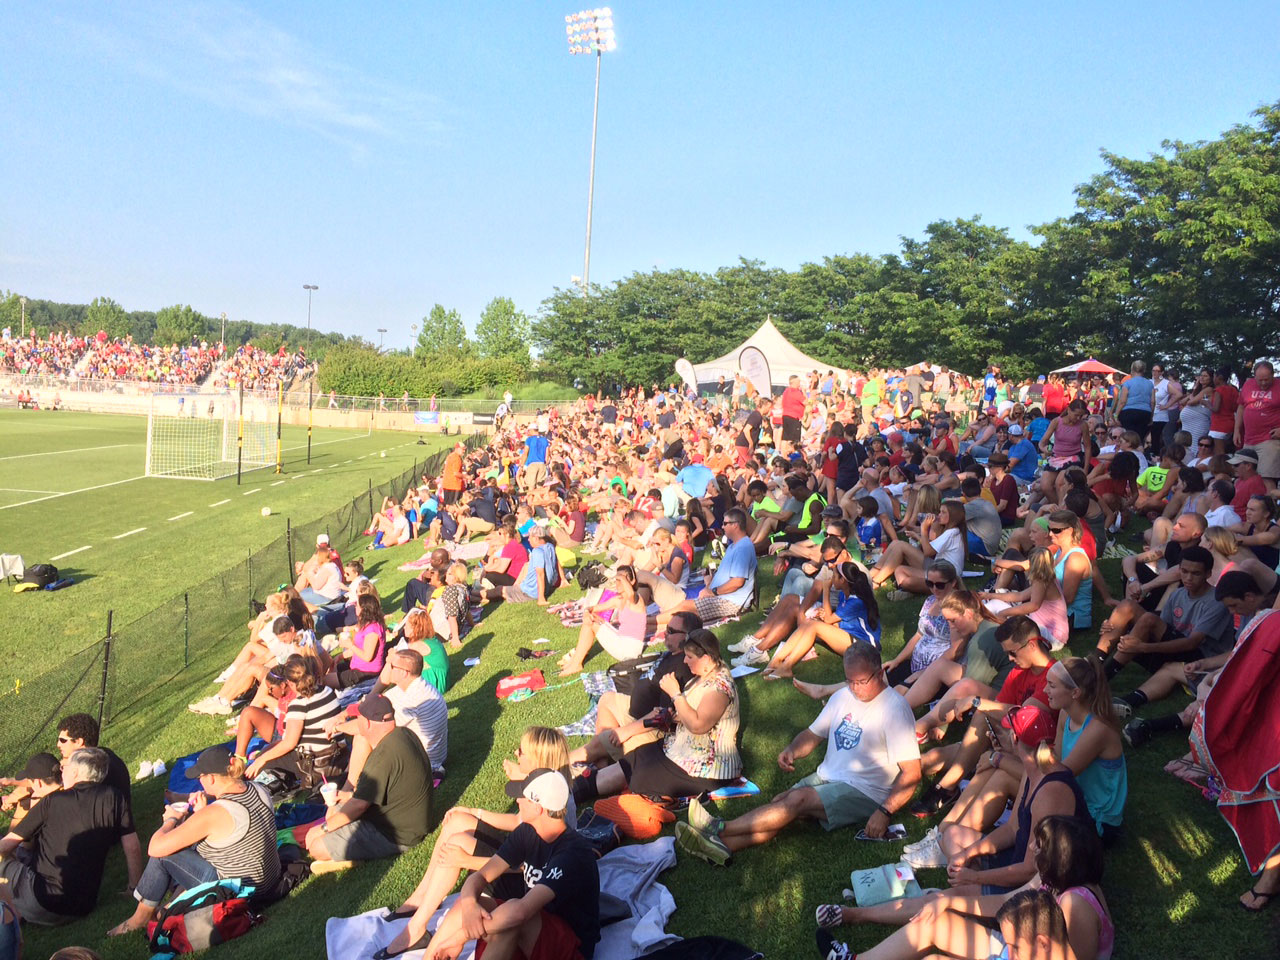 The biggest crowd in Spirit history, 5,413, turned out Saturday to watch the Spirit beat the Seattle Reign, 3-0. (WTOP/Noah Frank)